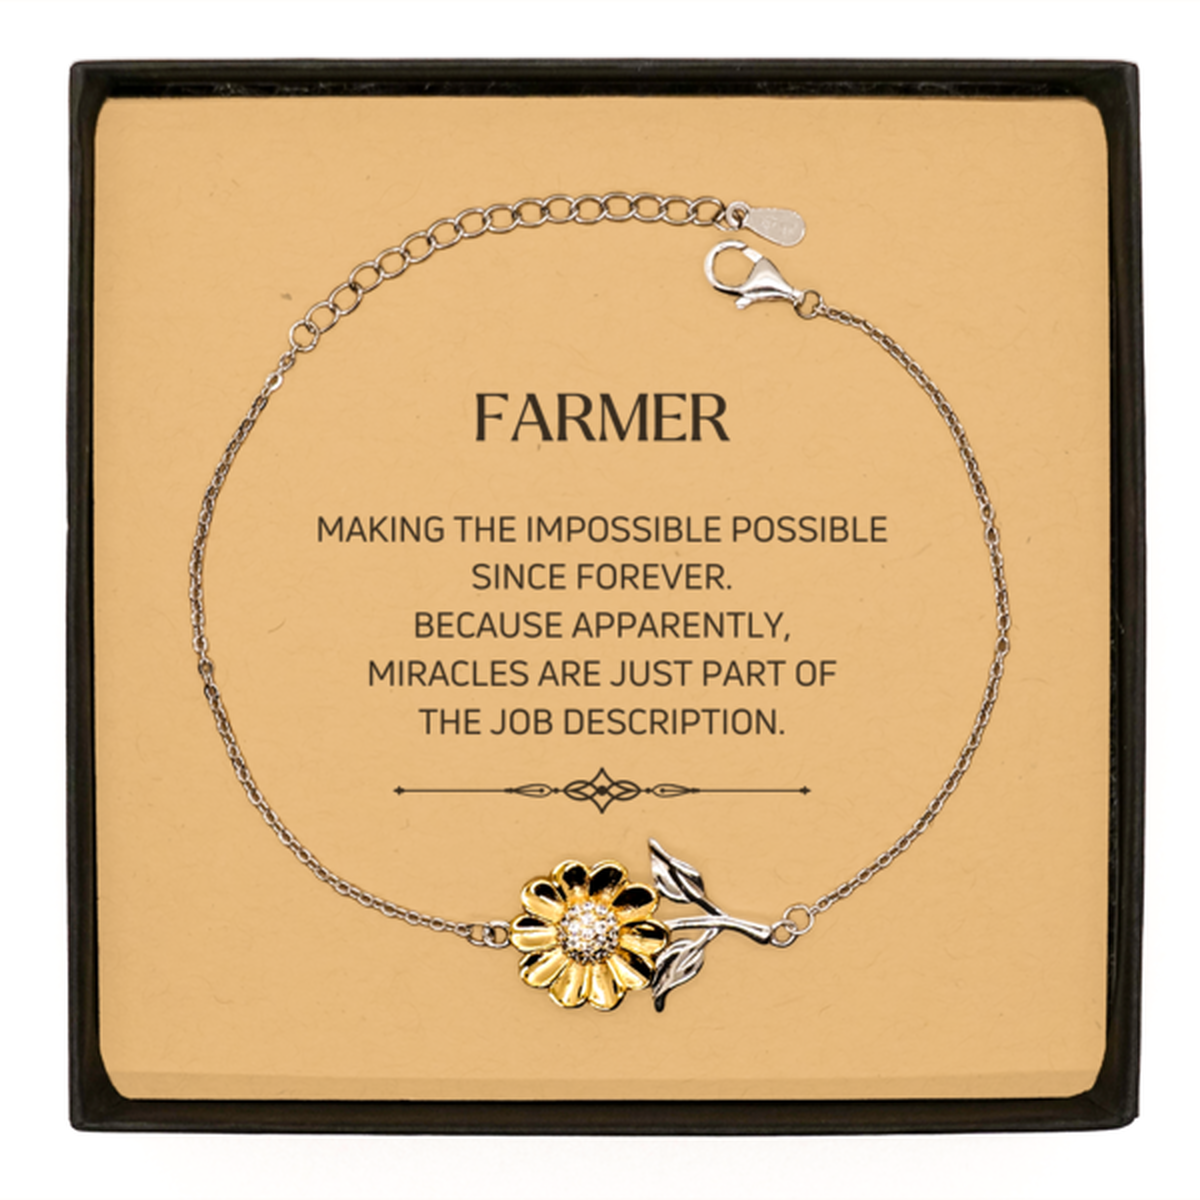 Funny Farmer Gifts, Miracles are just part of the job description, Inspirational Birthday Sunflower Bracelet For Farmer, Men, Women, Coworkers, Friends, Boss